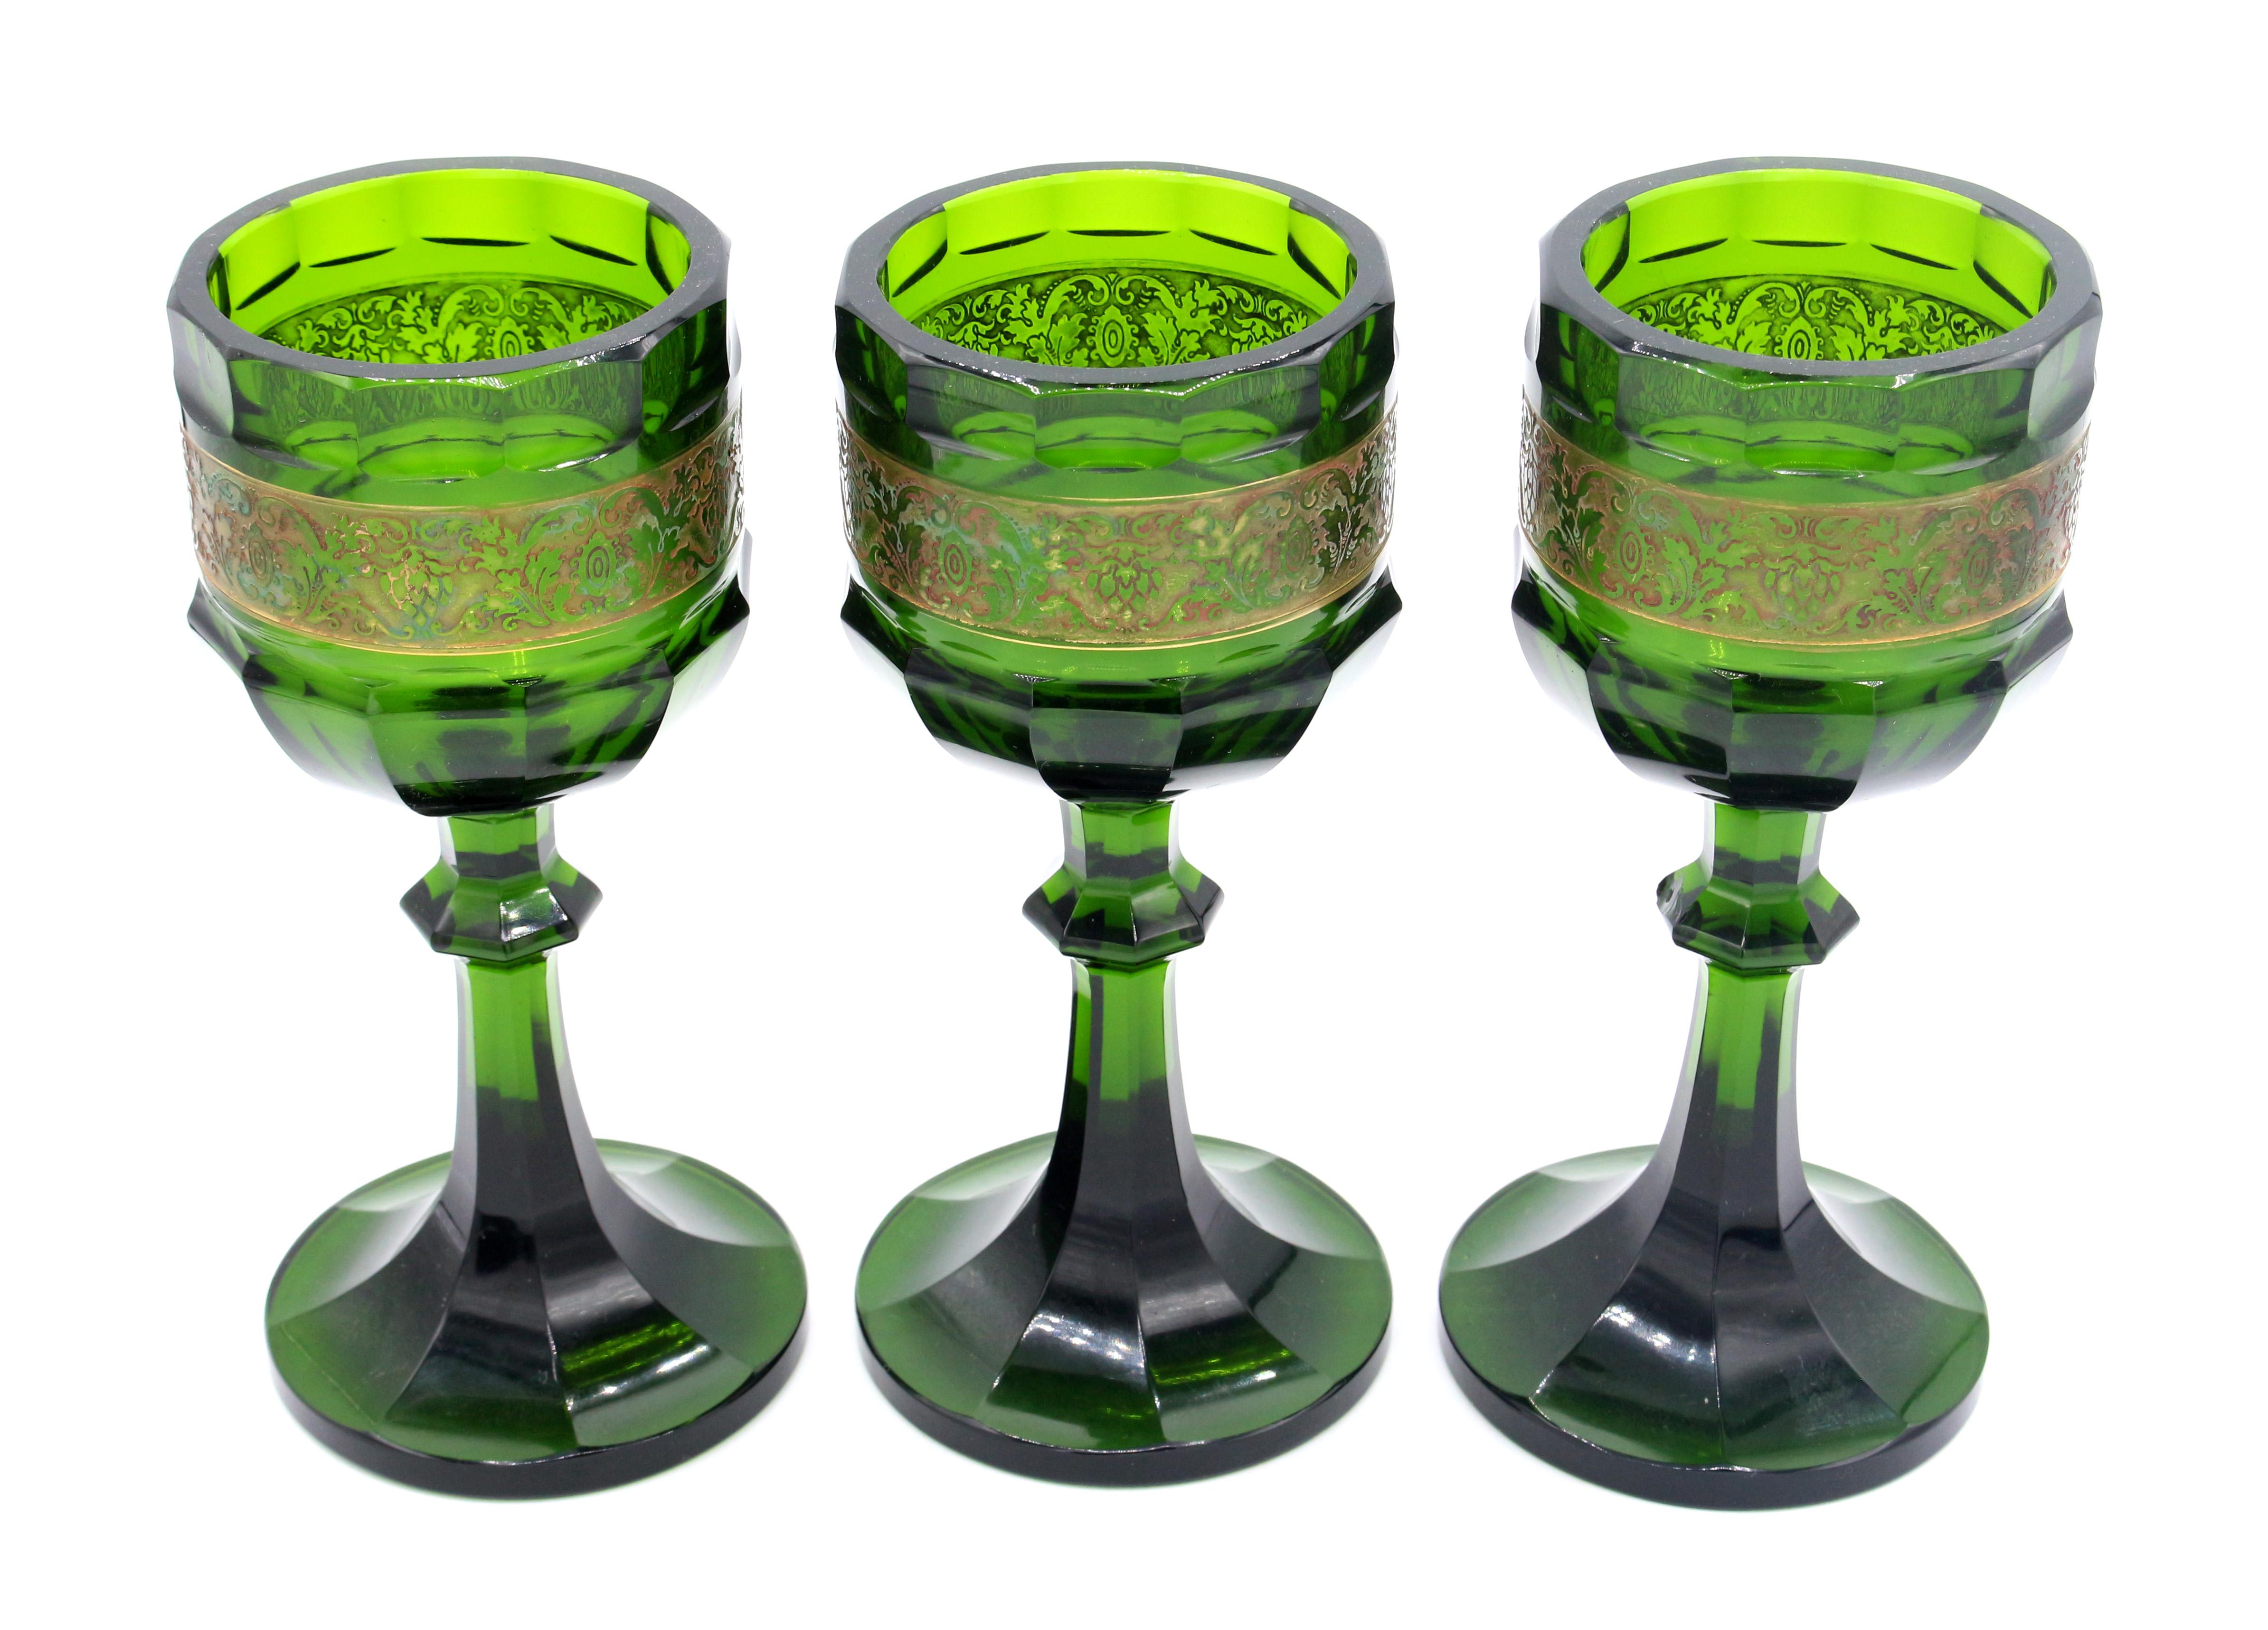 Circa 1920 Set of 6 Arts & Crafts White Wine Goblets by Moser In Good Condition For Sale In Chapel Hill, NC